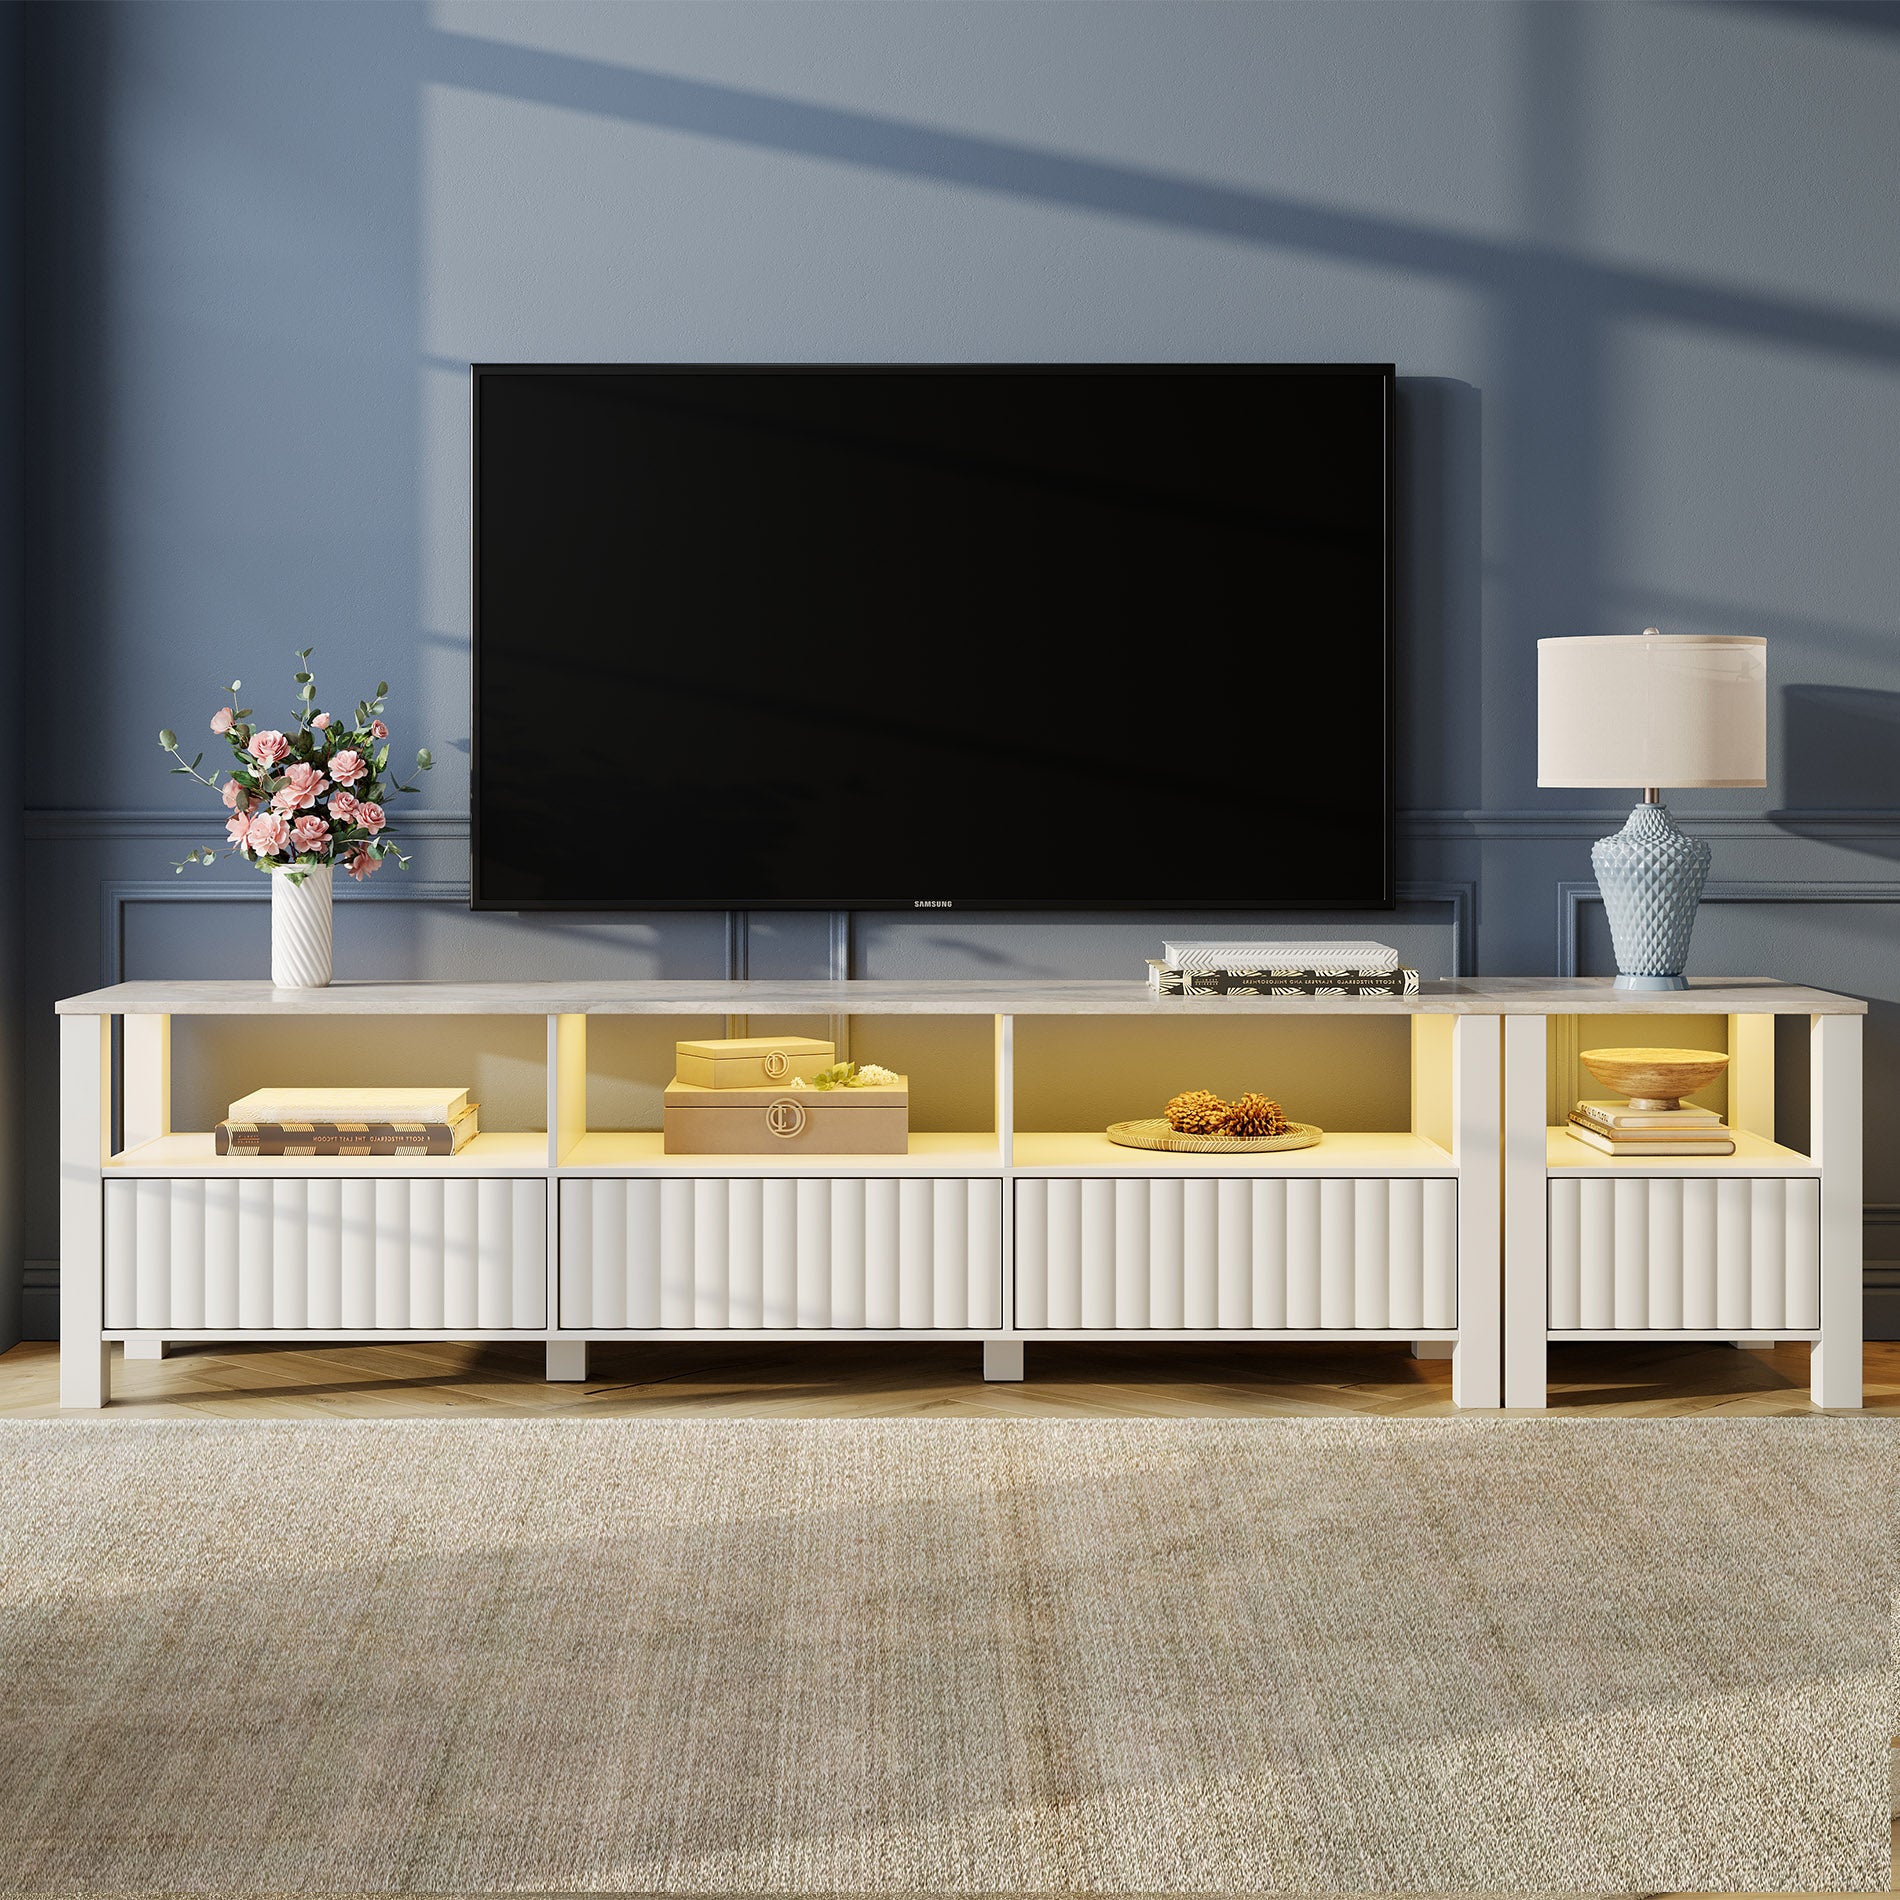 WAMPAT LED TV Stand for up to 85 Inch, Modern Entertainment Center